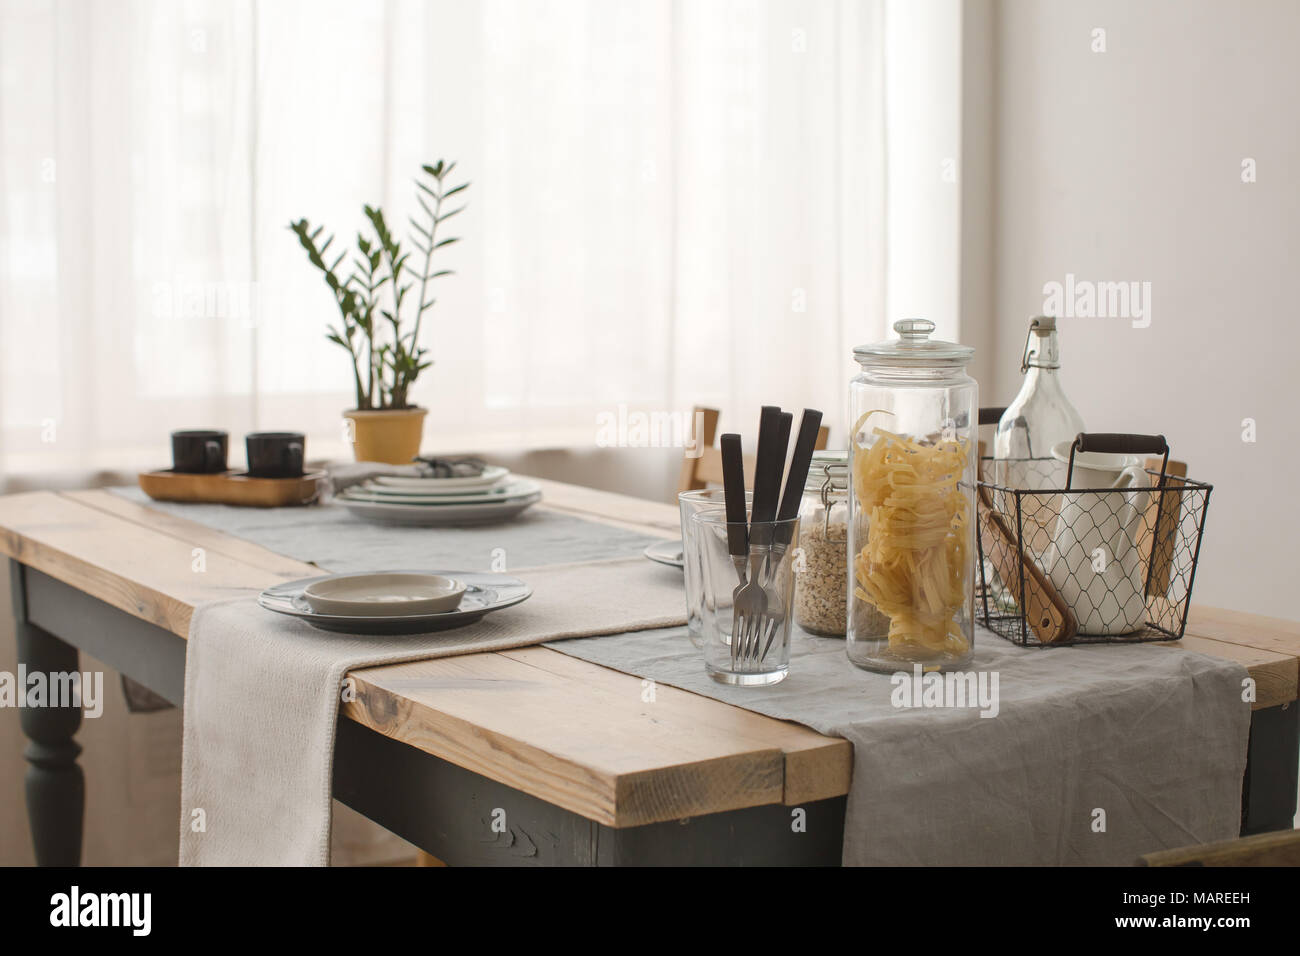 Served table and potted plant morning Stock Photo